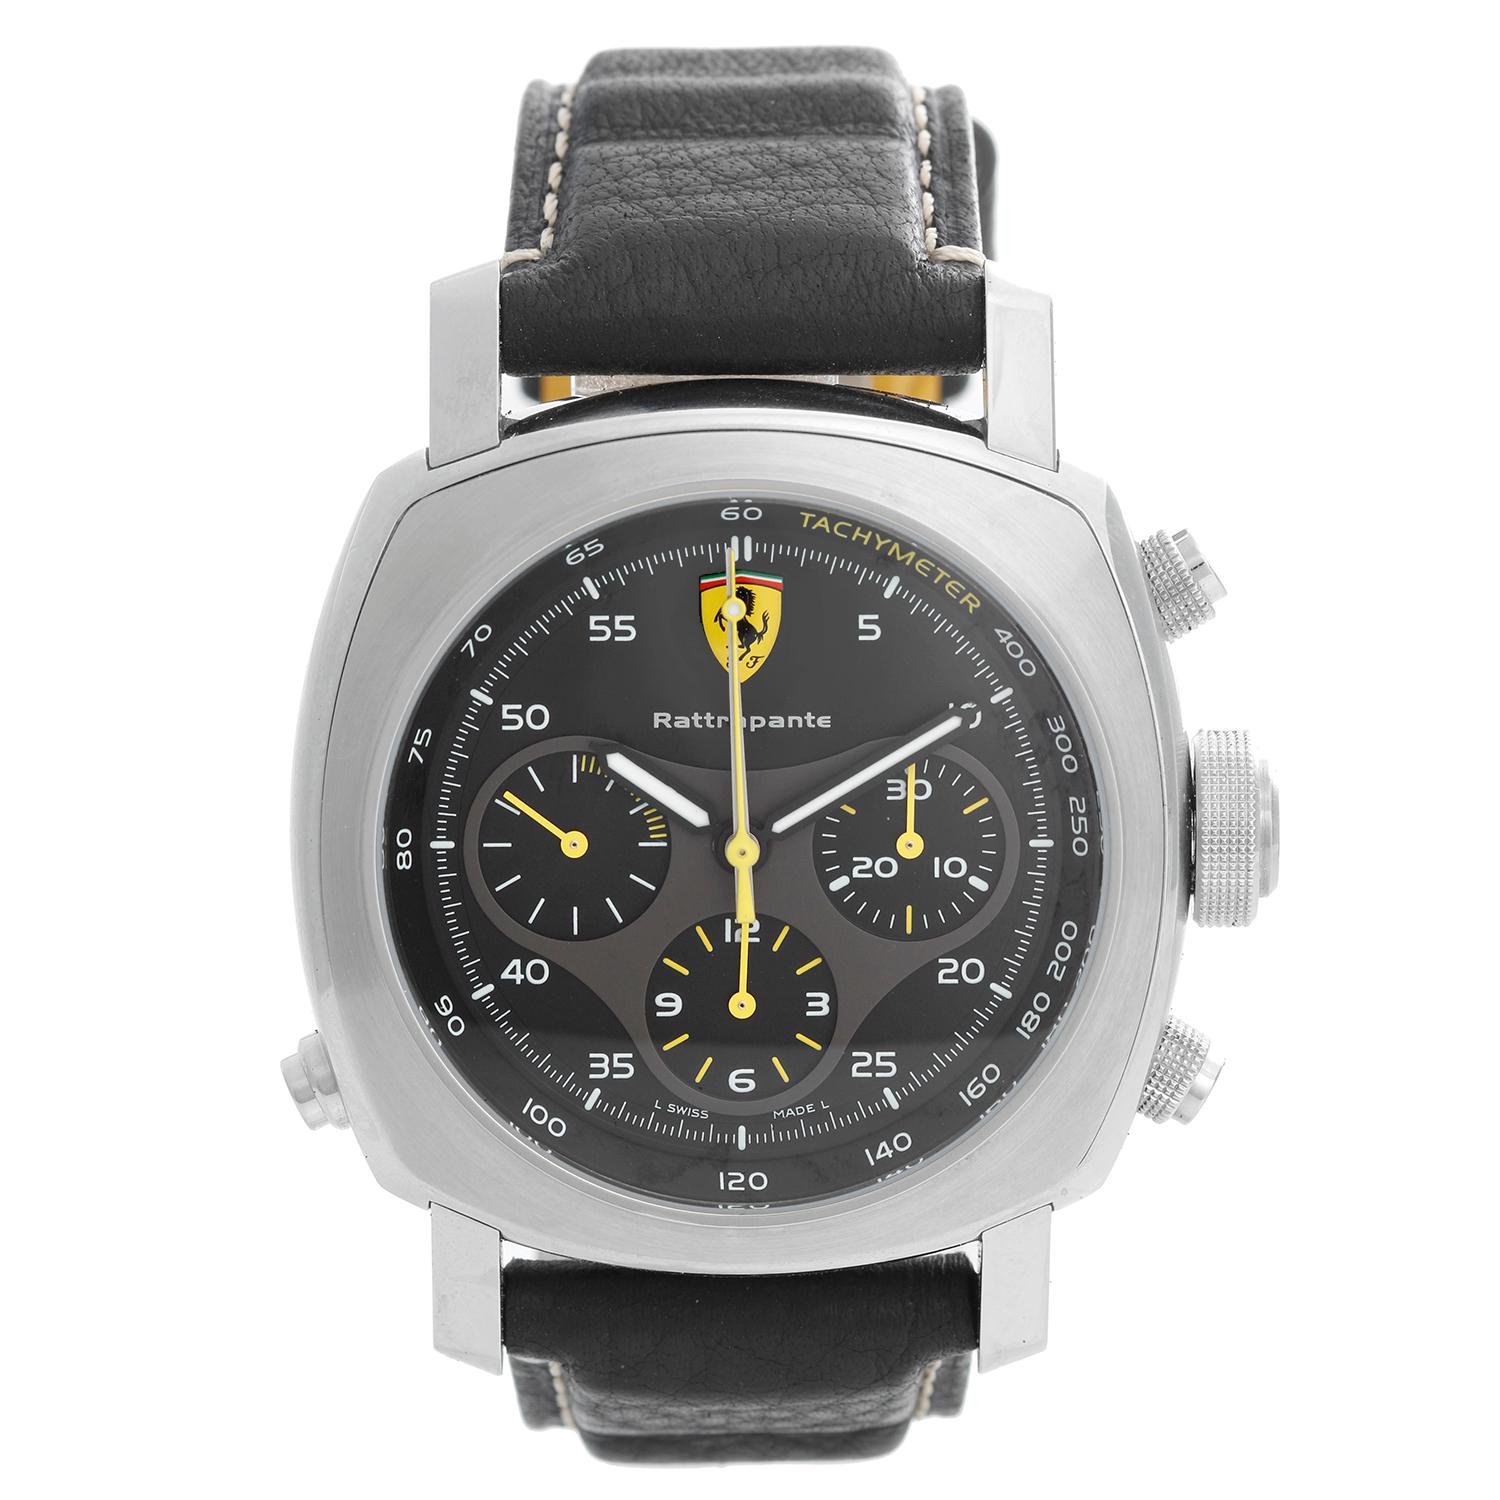 Ferrari by Panerai Rattrapante Chronograph Men's Watch FER00010 - Automatic. Stainless steel case ( 45 mm ). Black Dial with Luminescent Hands, White Arabic Numerals, Tachymeter Scale. Split Second Rattrapante Chronograph Functions, Subsidiary